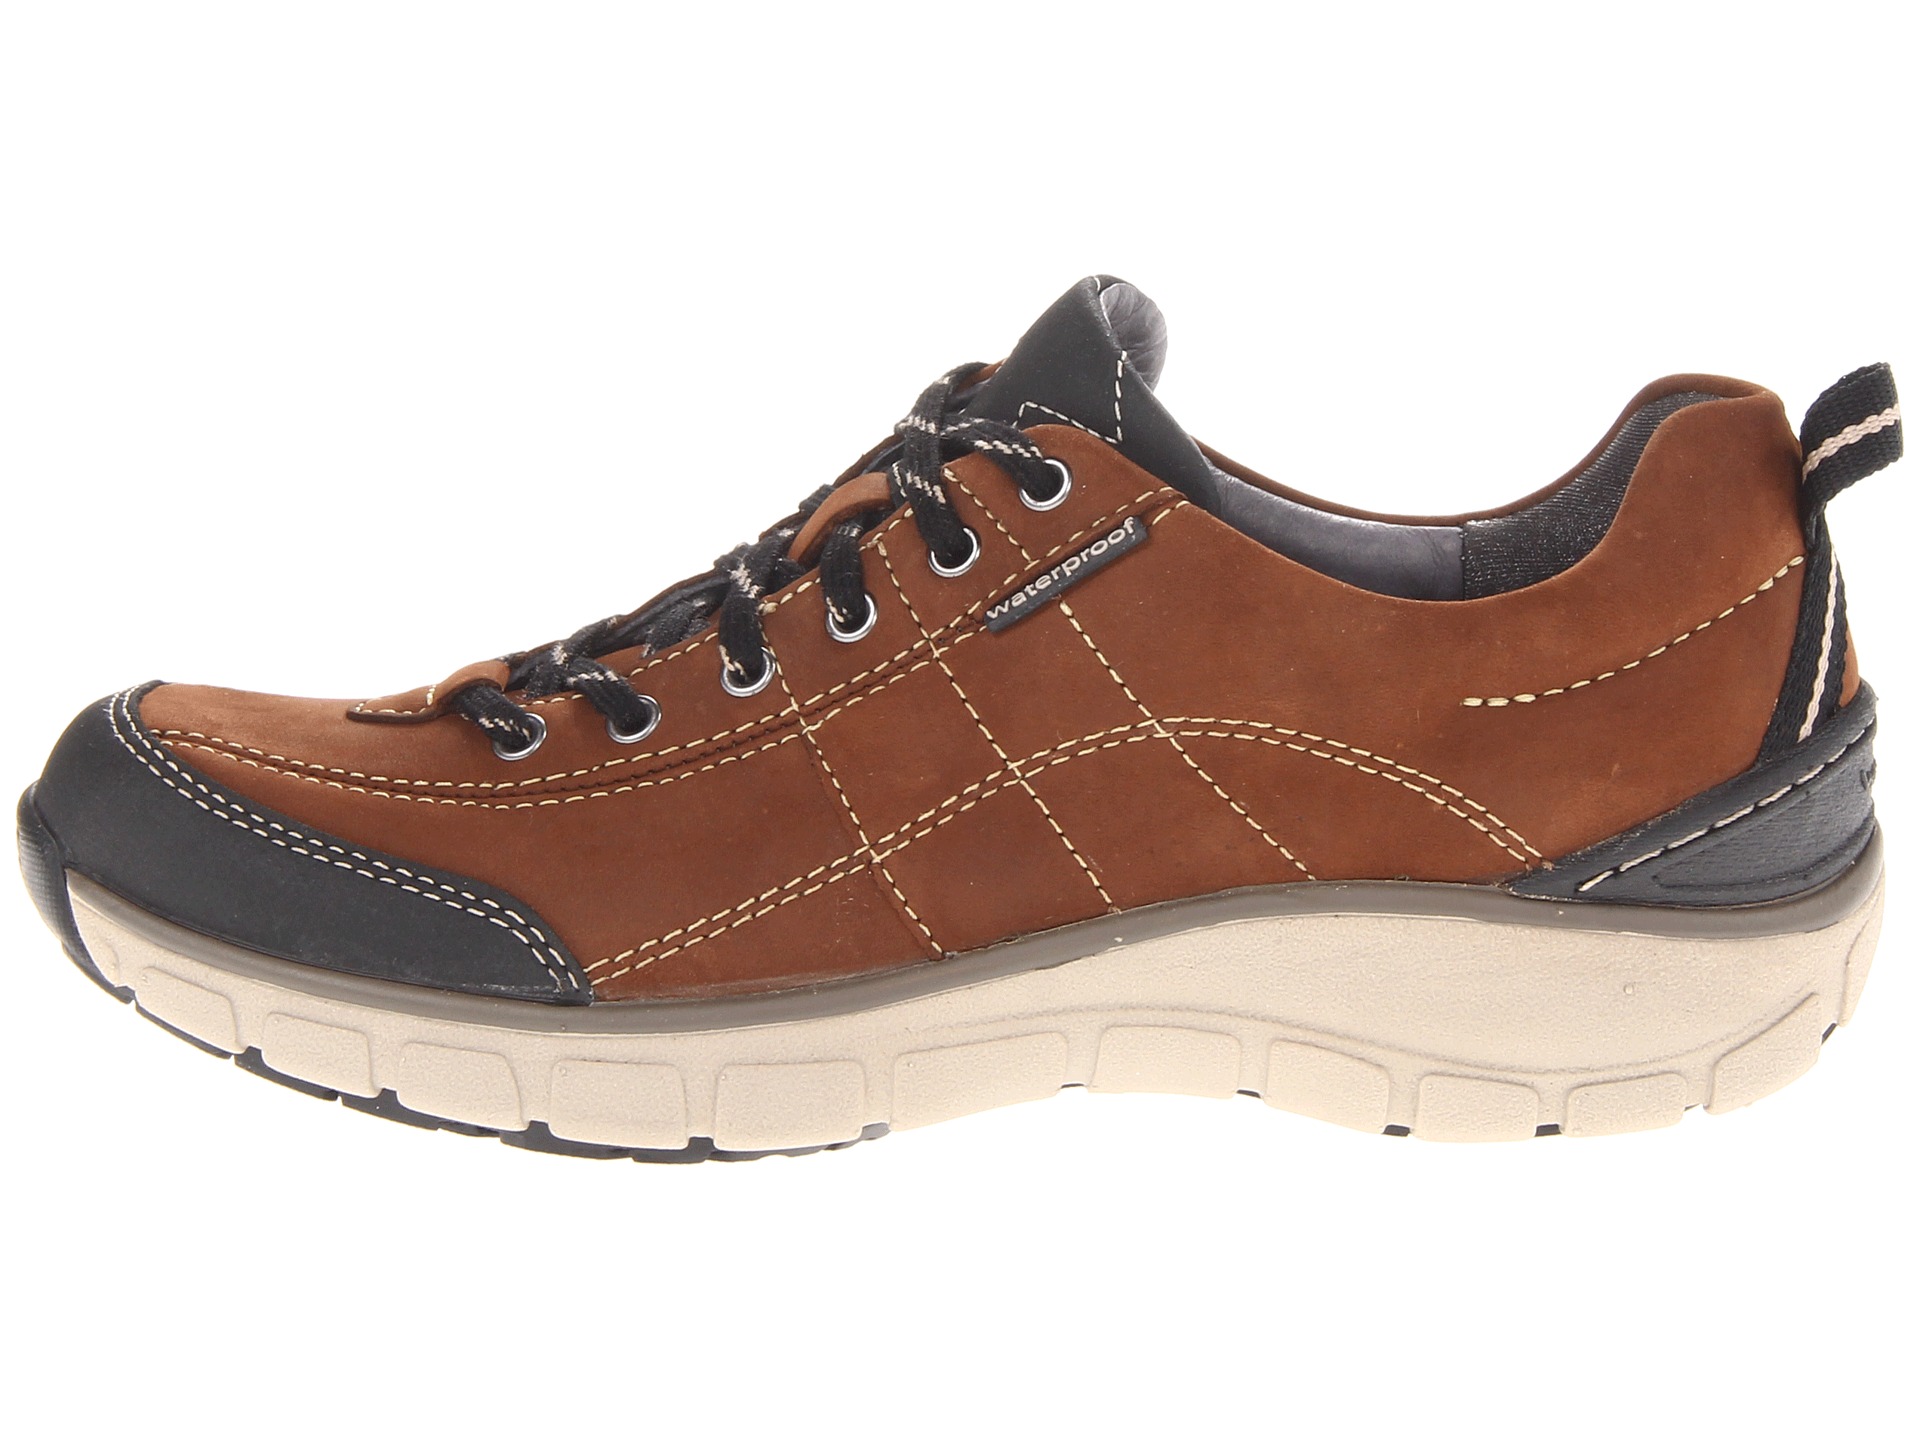 Clarks Wave.Trek Brown Leather - Zappos.com Free Shipping BOTH Ways